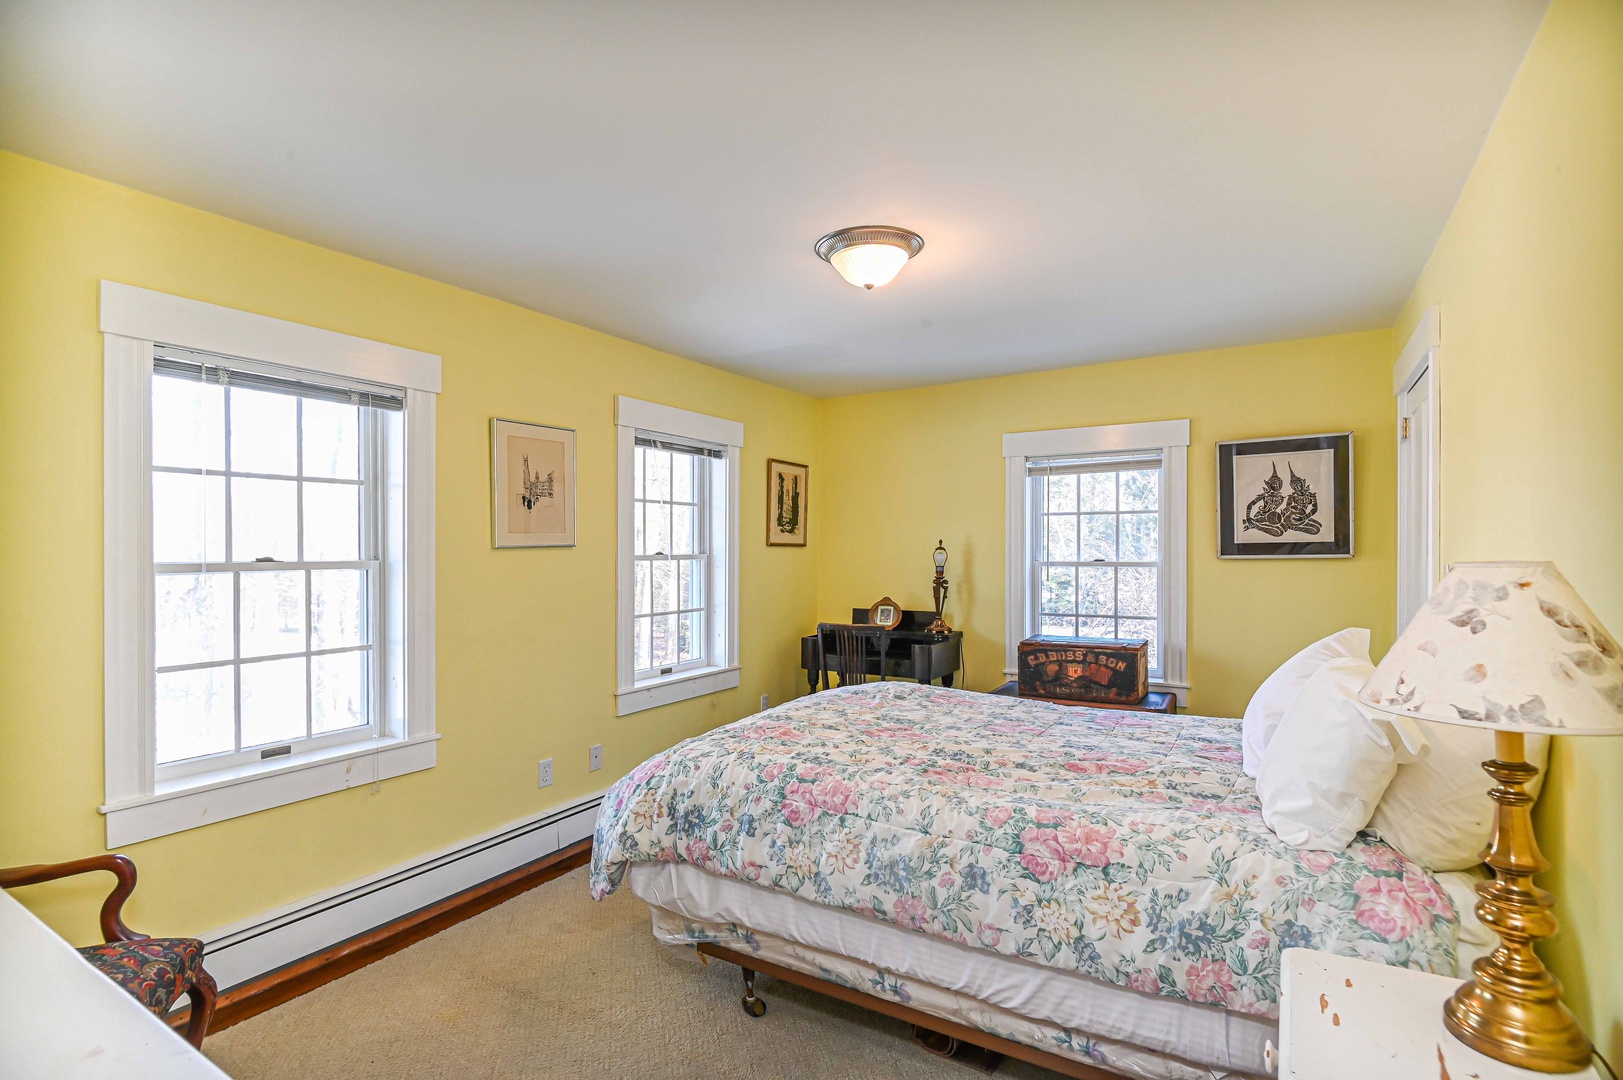 This cheerful second-floor bedroom features a cozy queen-sized bed